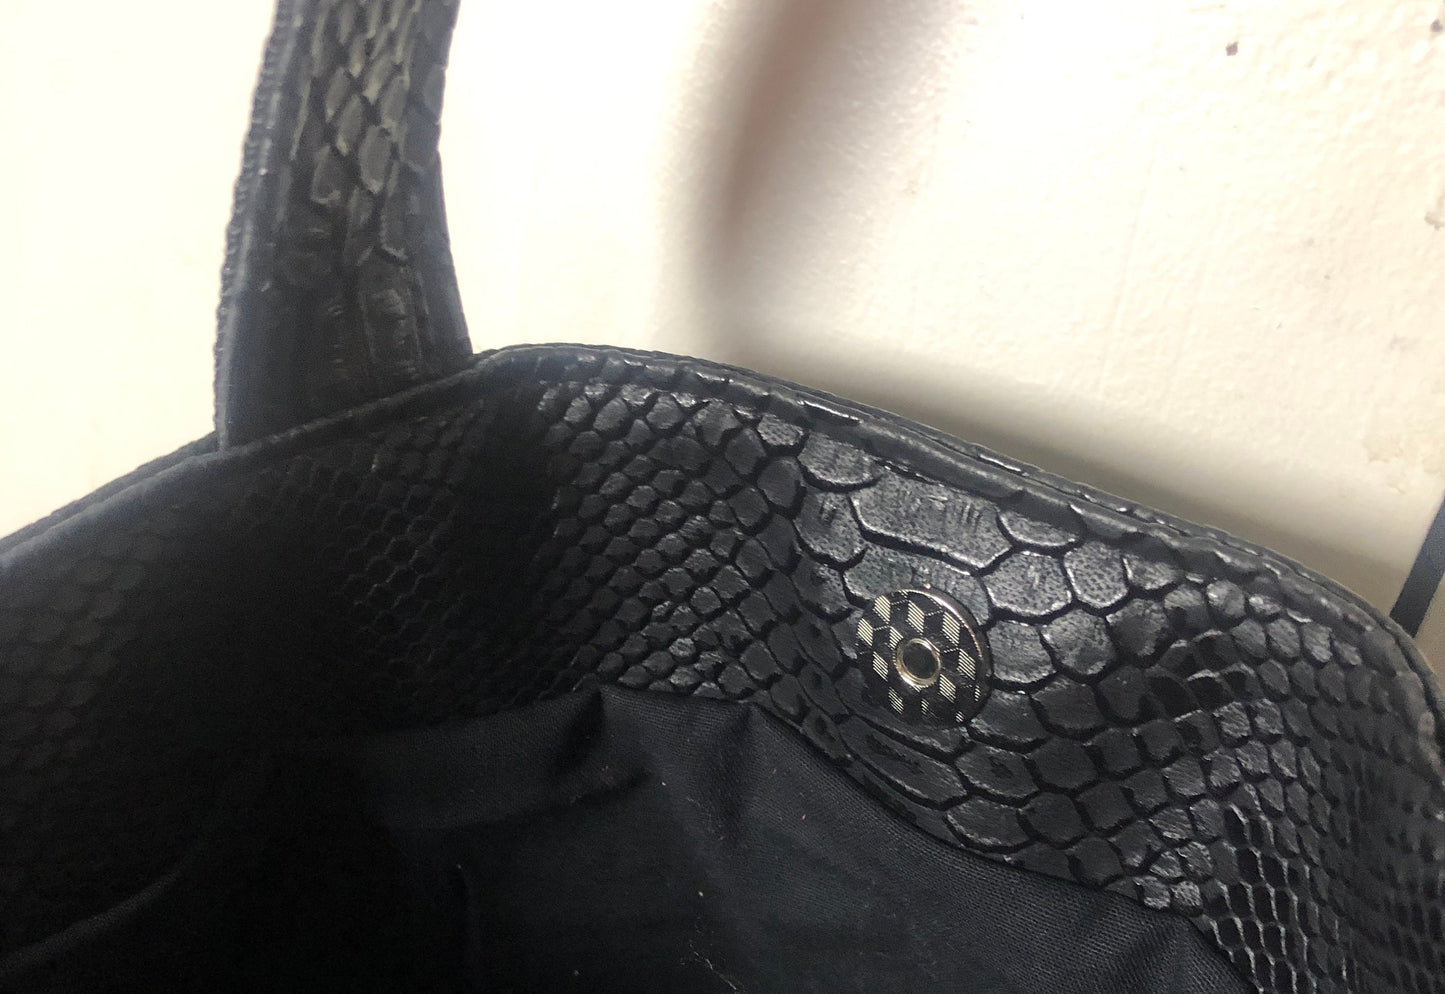 Black faux leather tote bag - faux snake leather tote bag